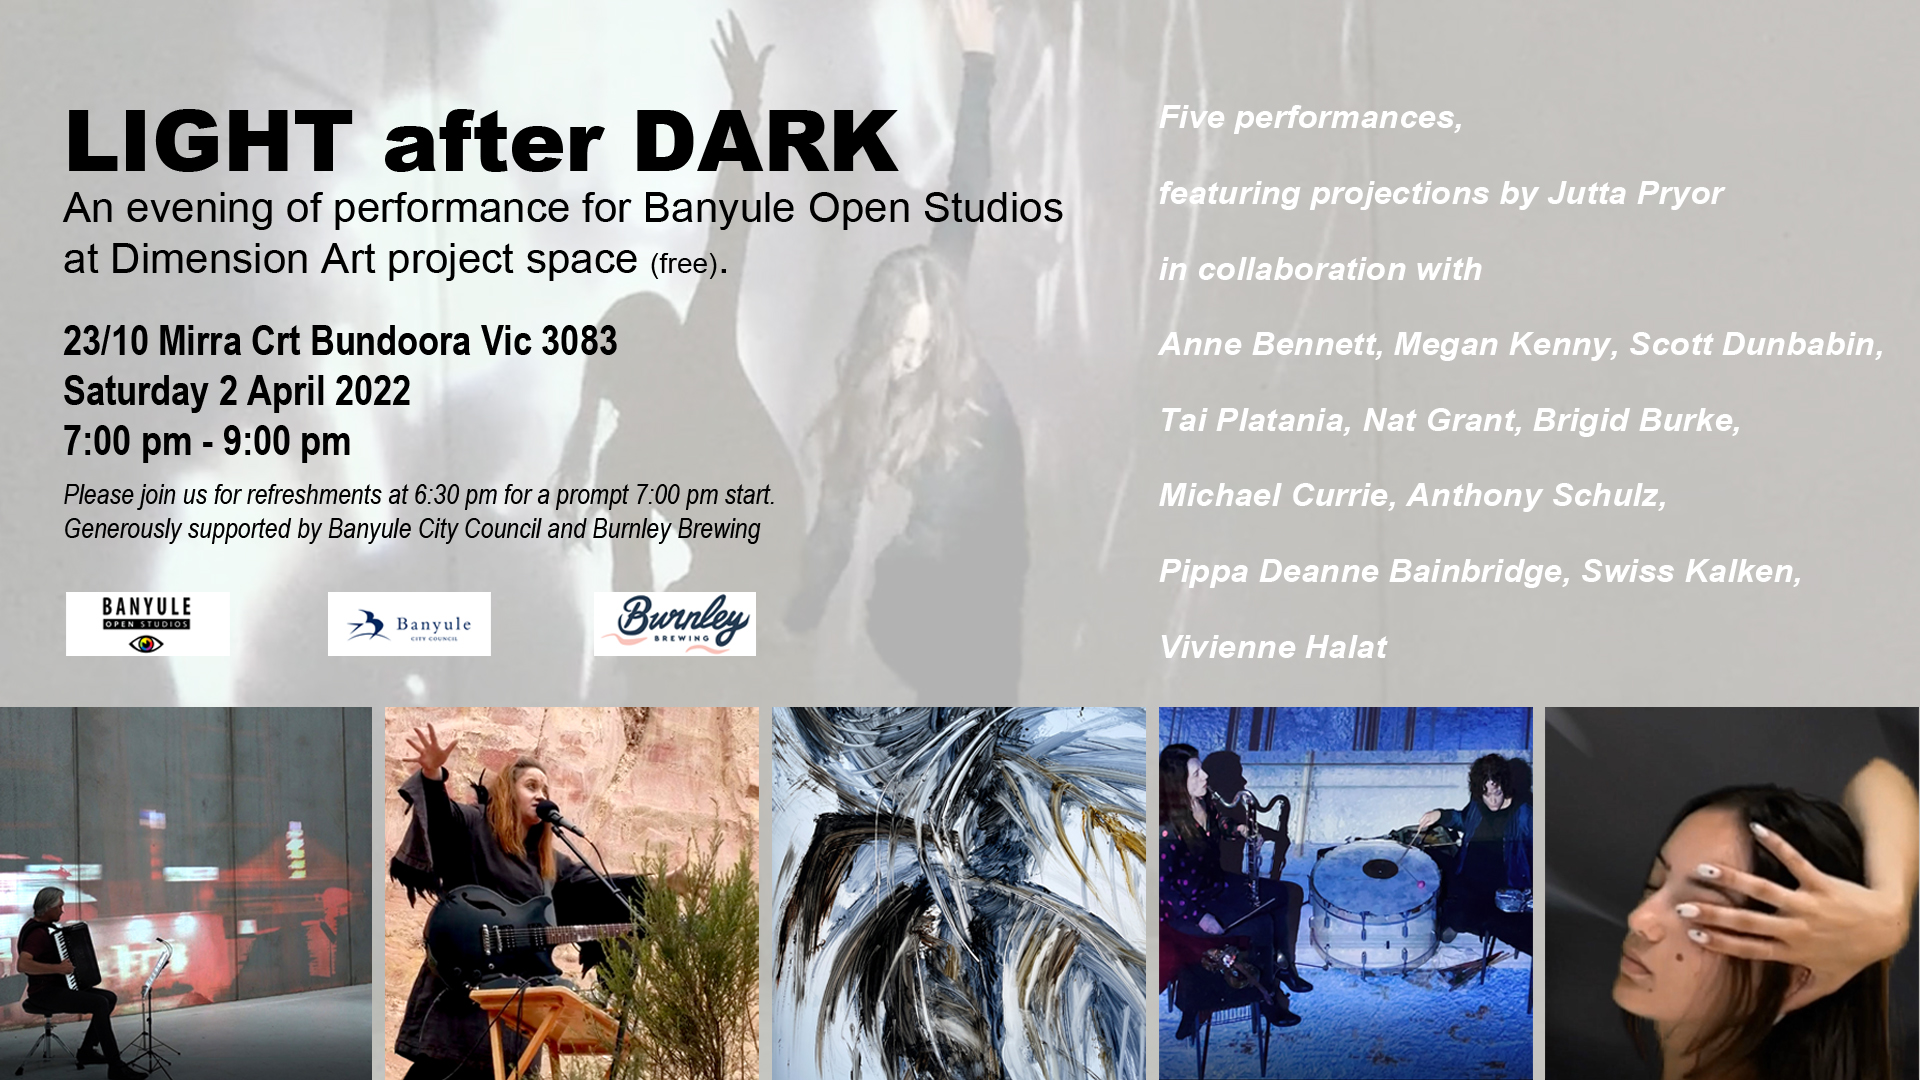 Light After Dark Performances at Dimension Art Project Space with Jutta Pryor